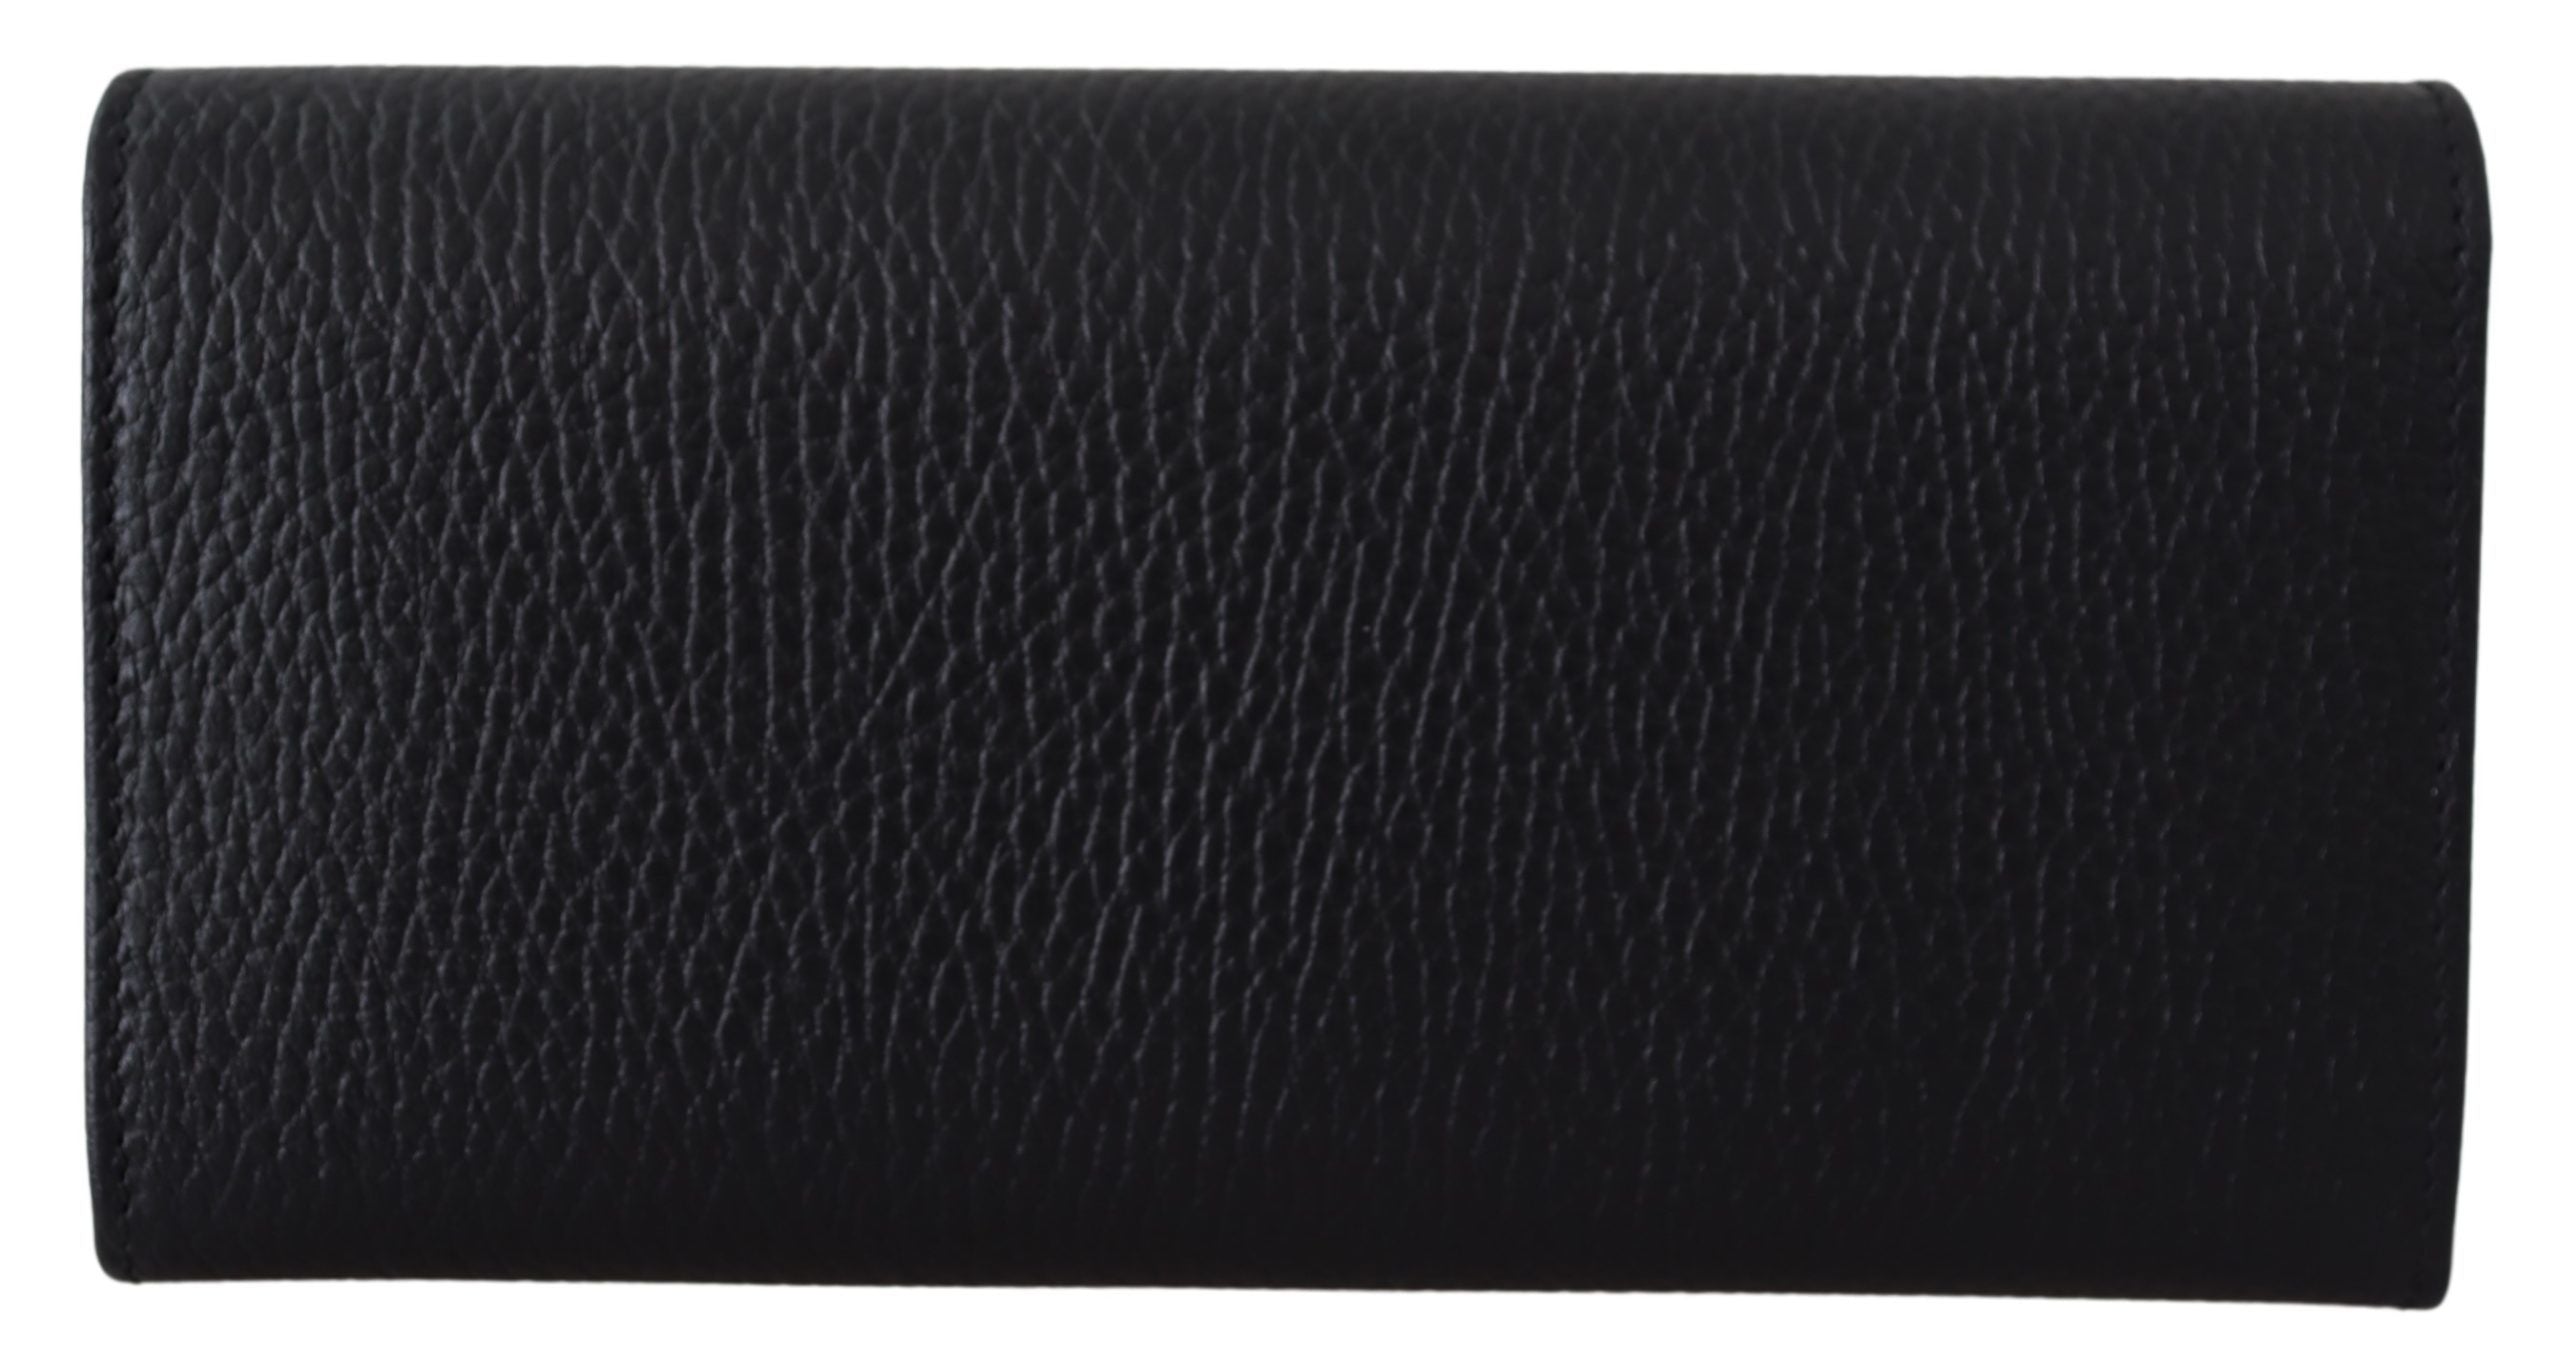 Elegant Black Leather Wallet with GG Snap Closure - Divitiae Glamour